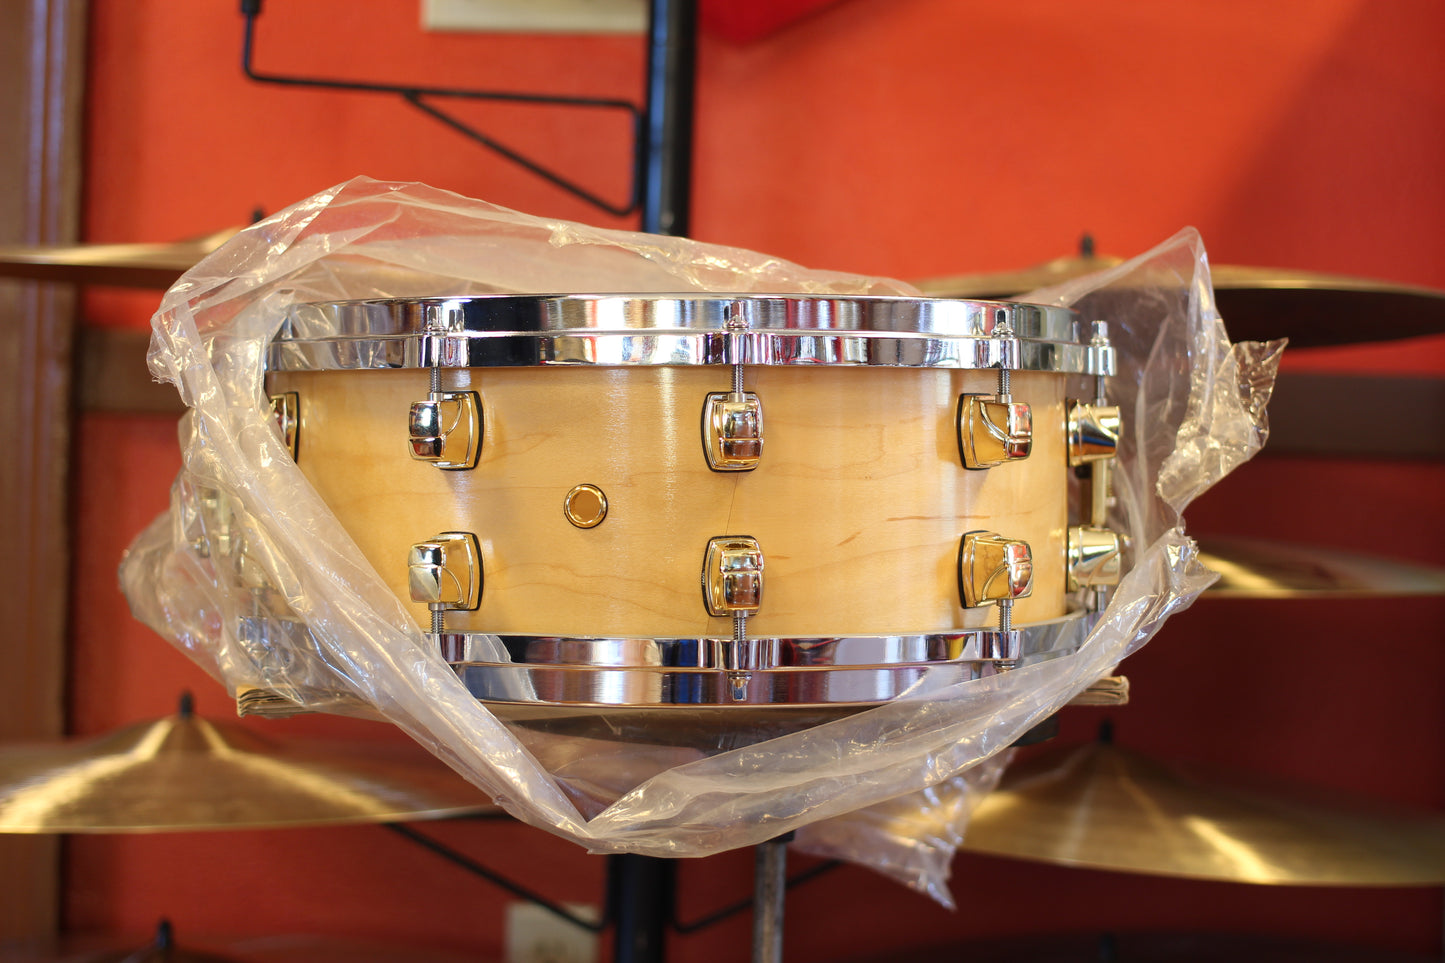 NOS Yamaha 25th Anniversary Snare Drum 5.5"x14" in Natural Maple